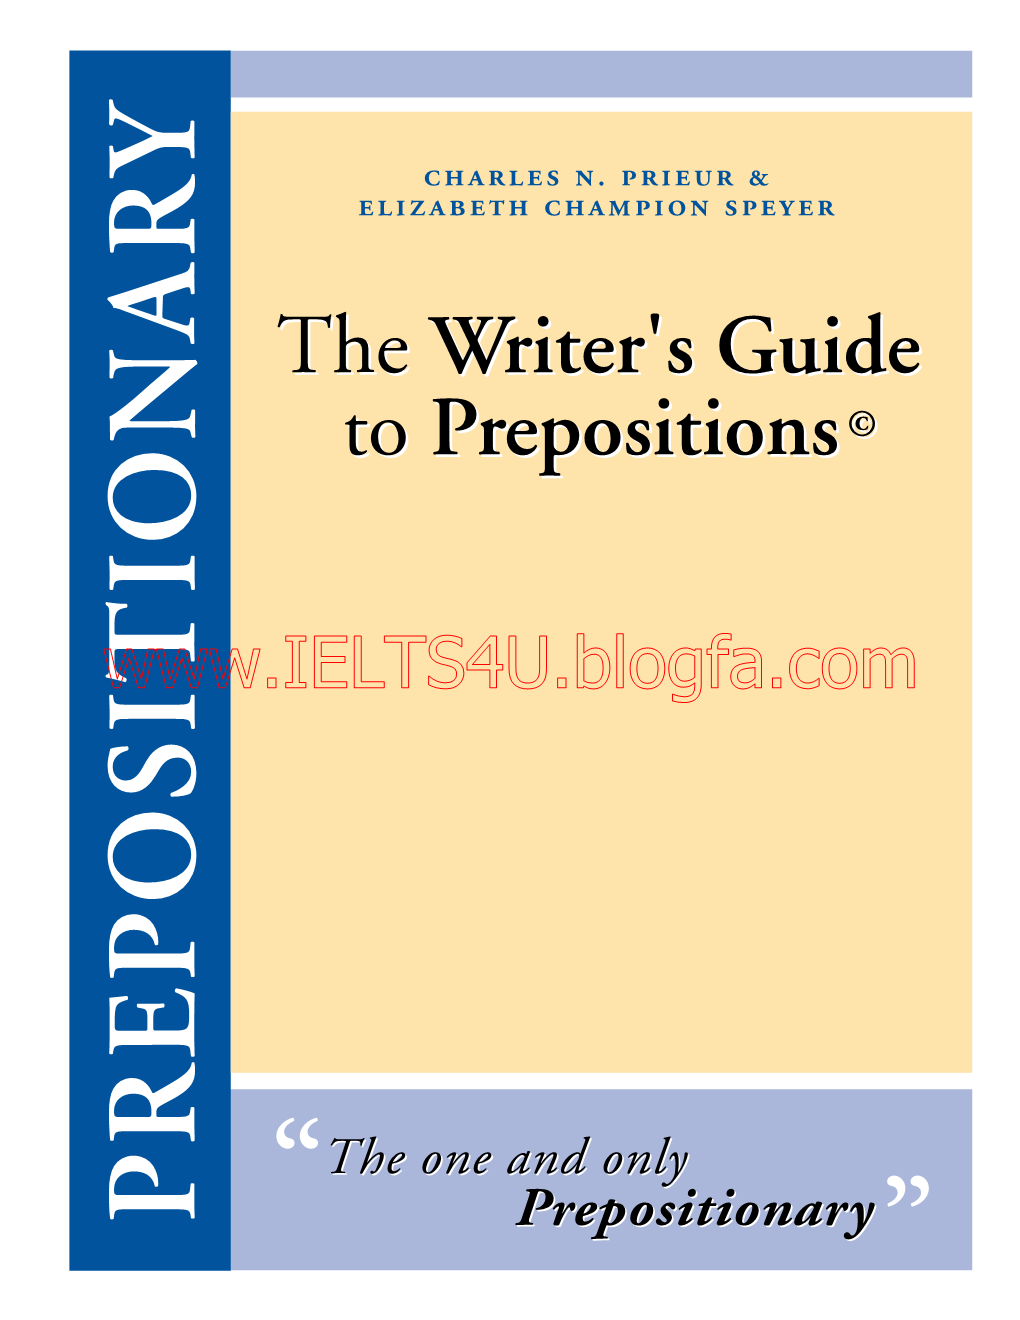 Prepositionary the Writer's Guide to Prepositions.Pdf